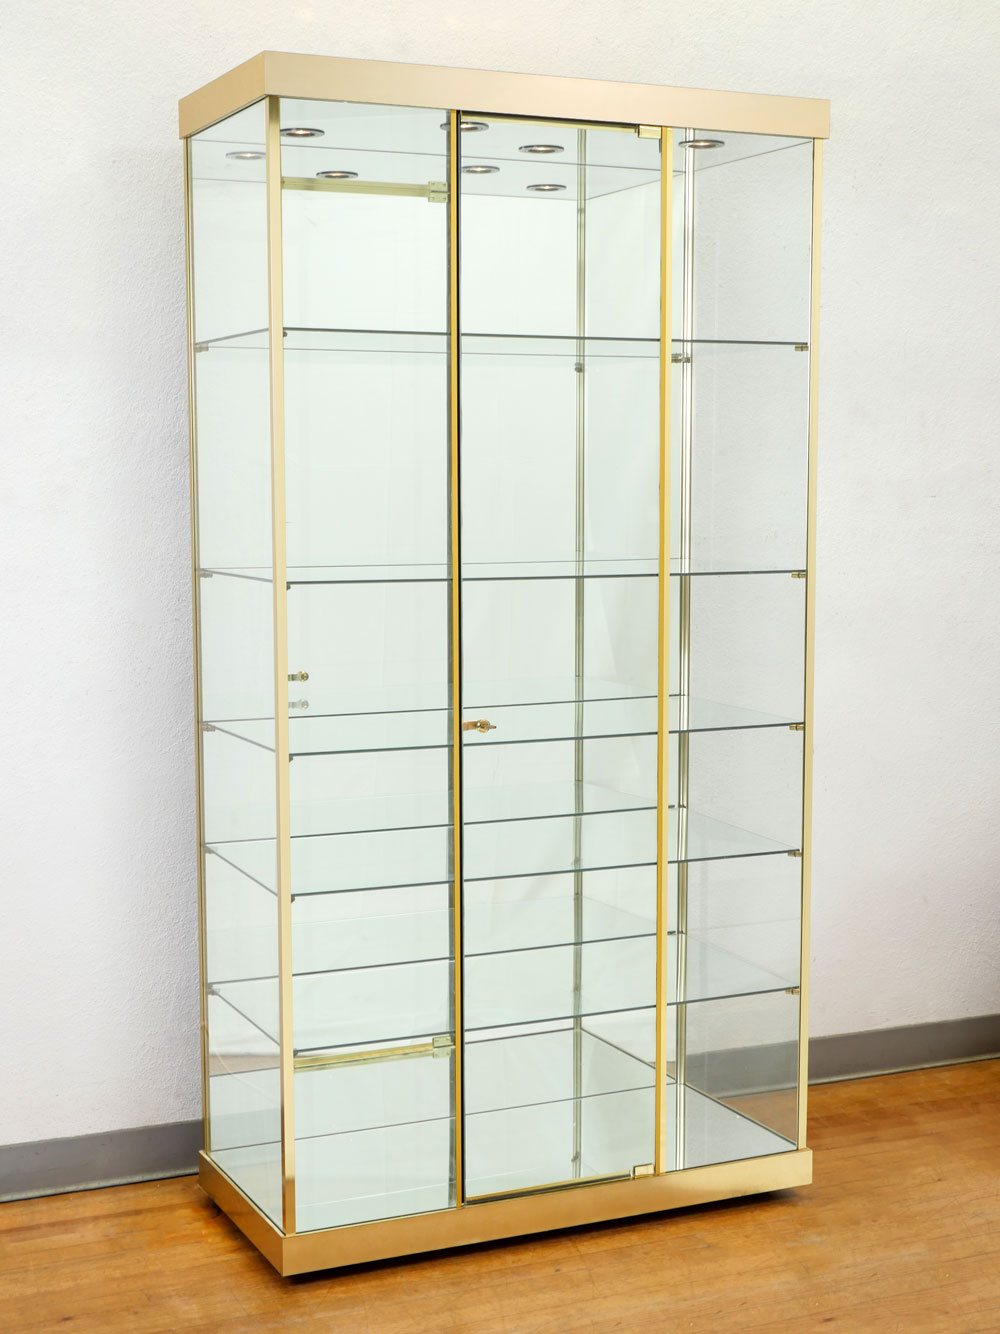 TECHNO LIGHTED GLASS DISPLAY CABINET: